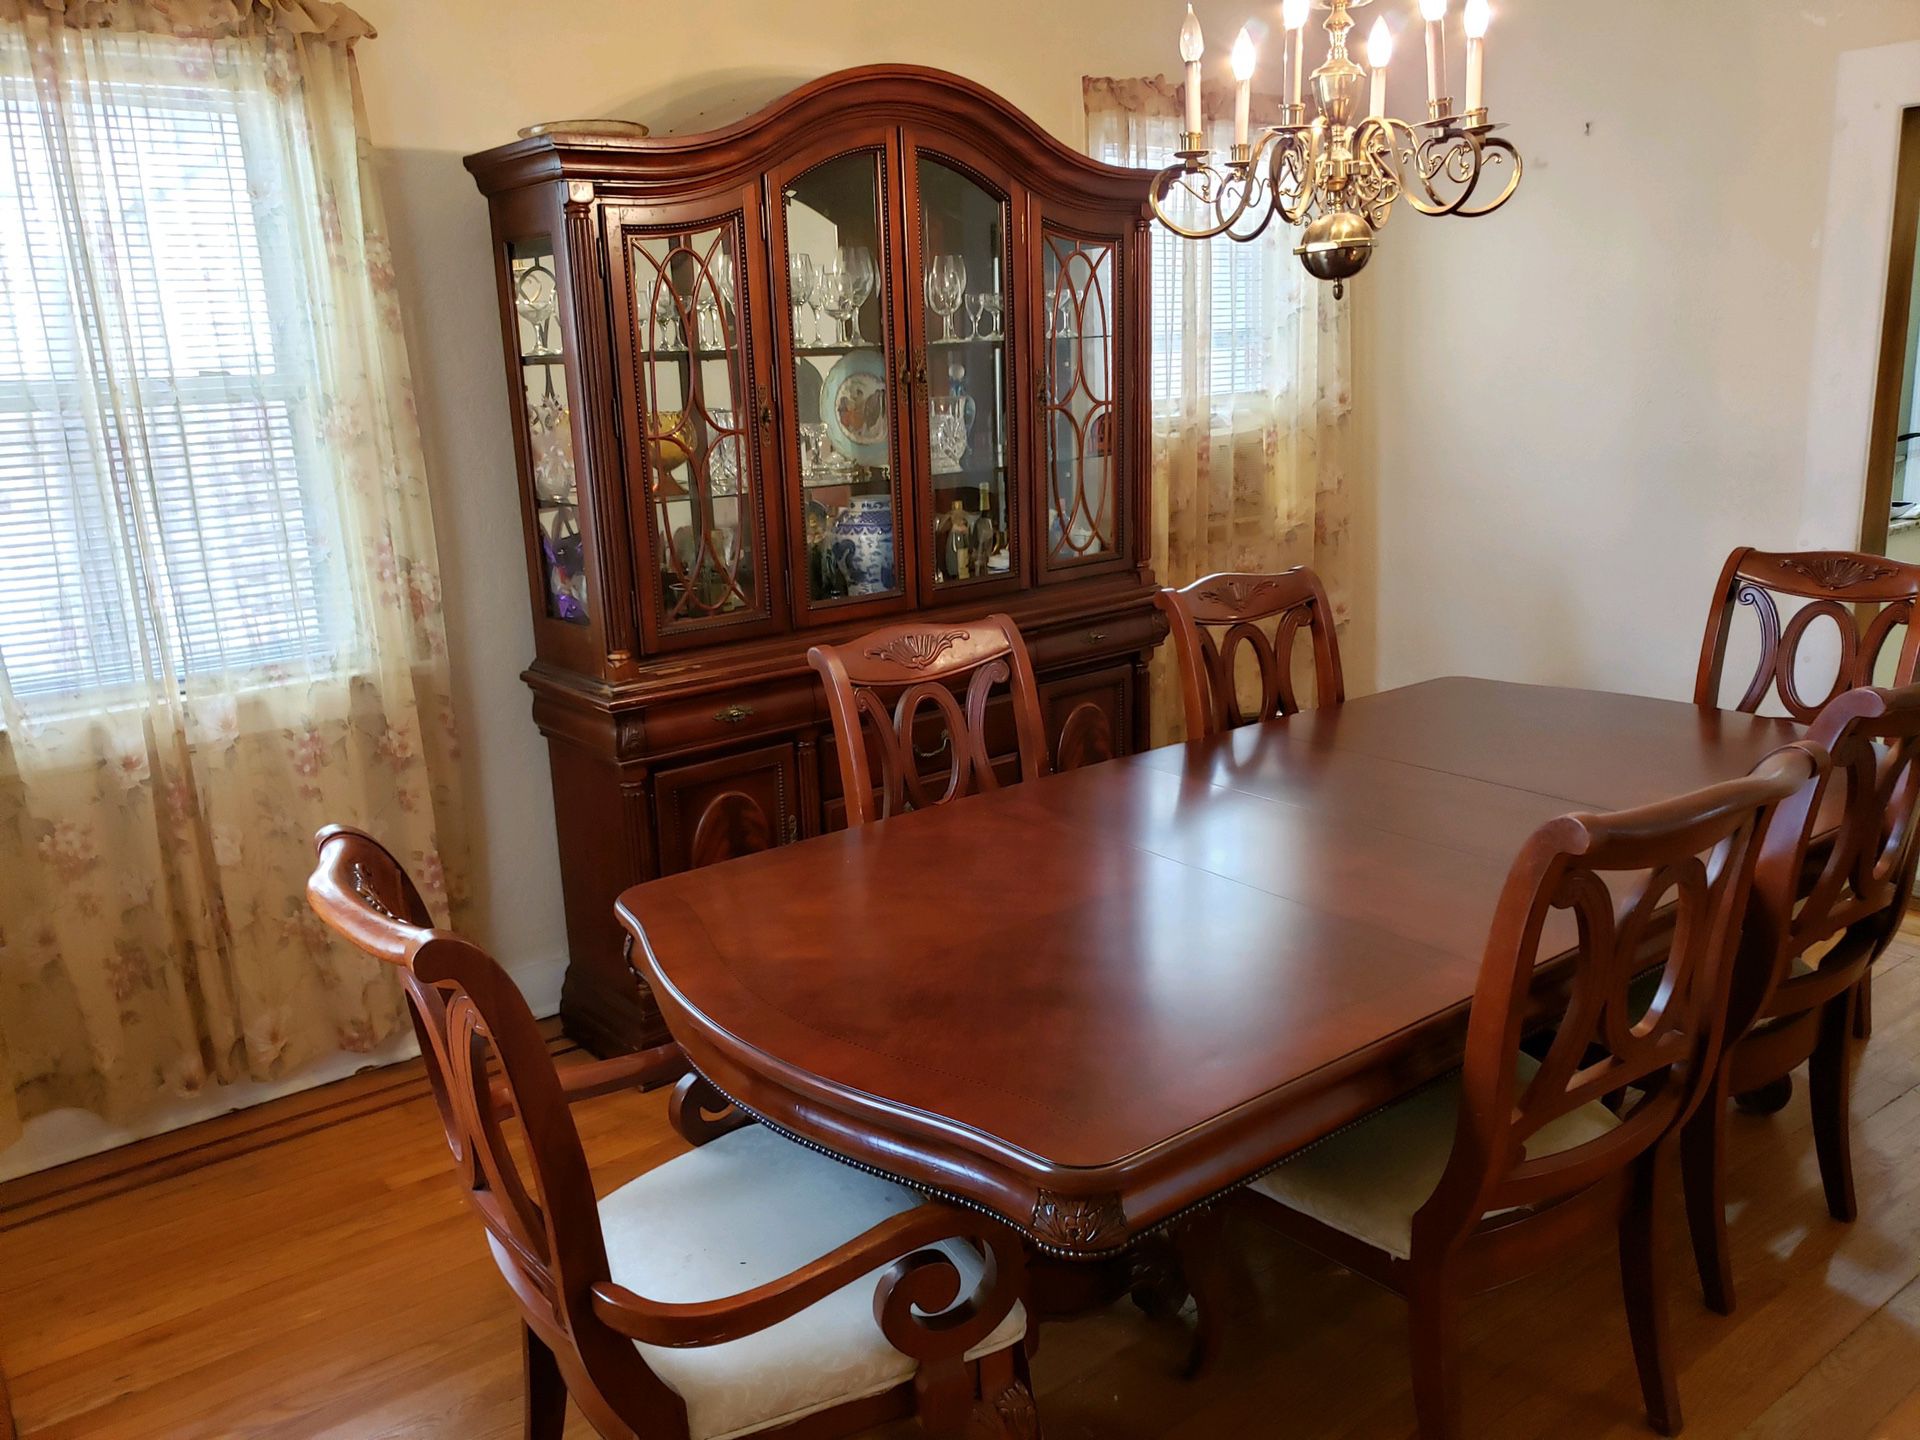 Dining Room Table With 6 Chairs Inlay